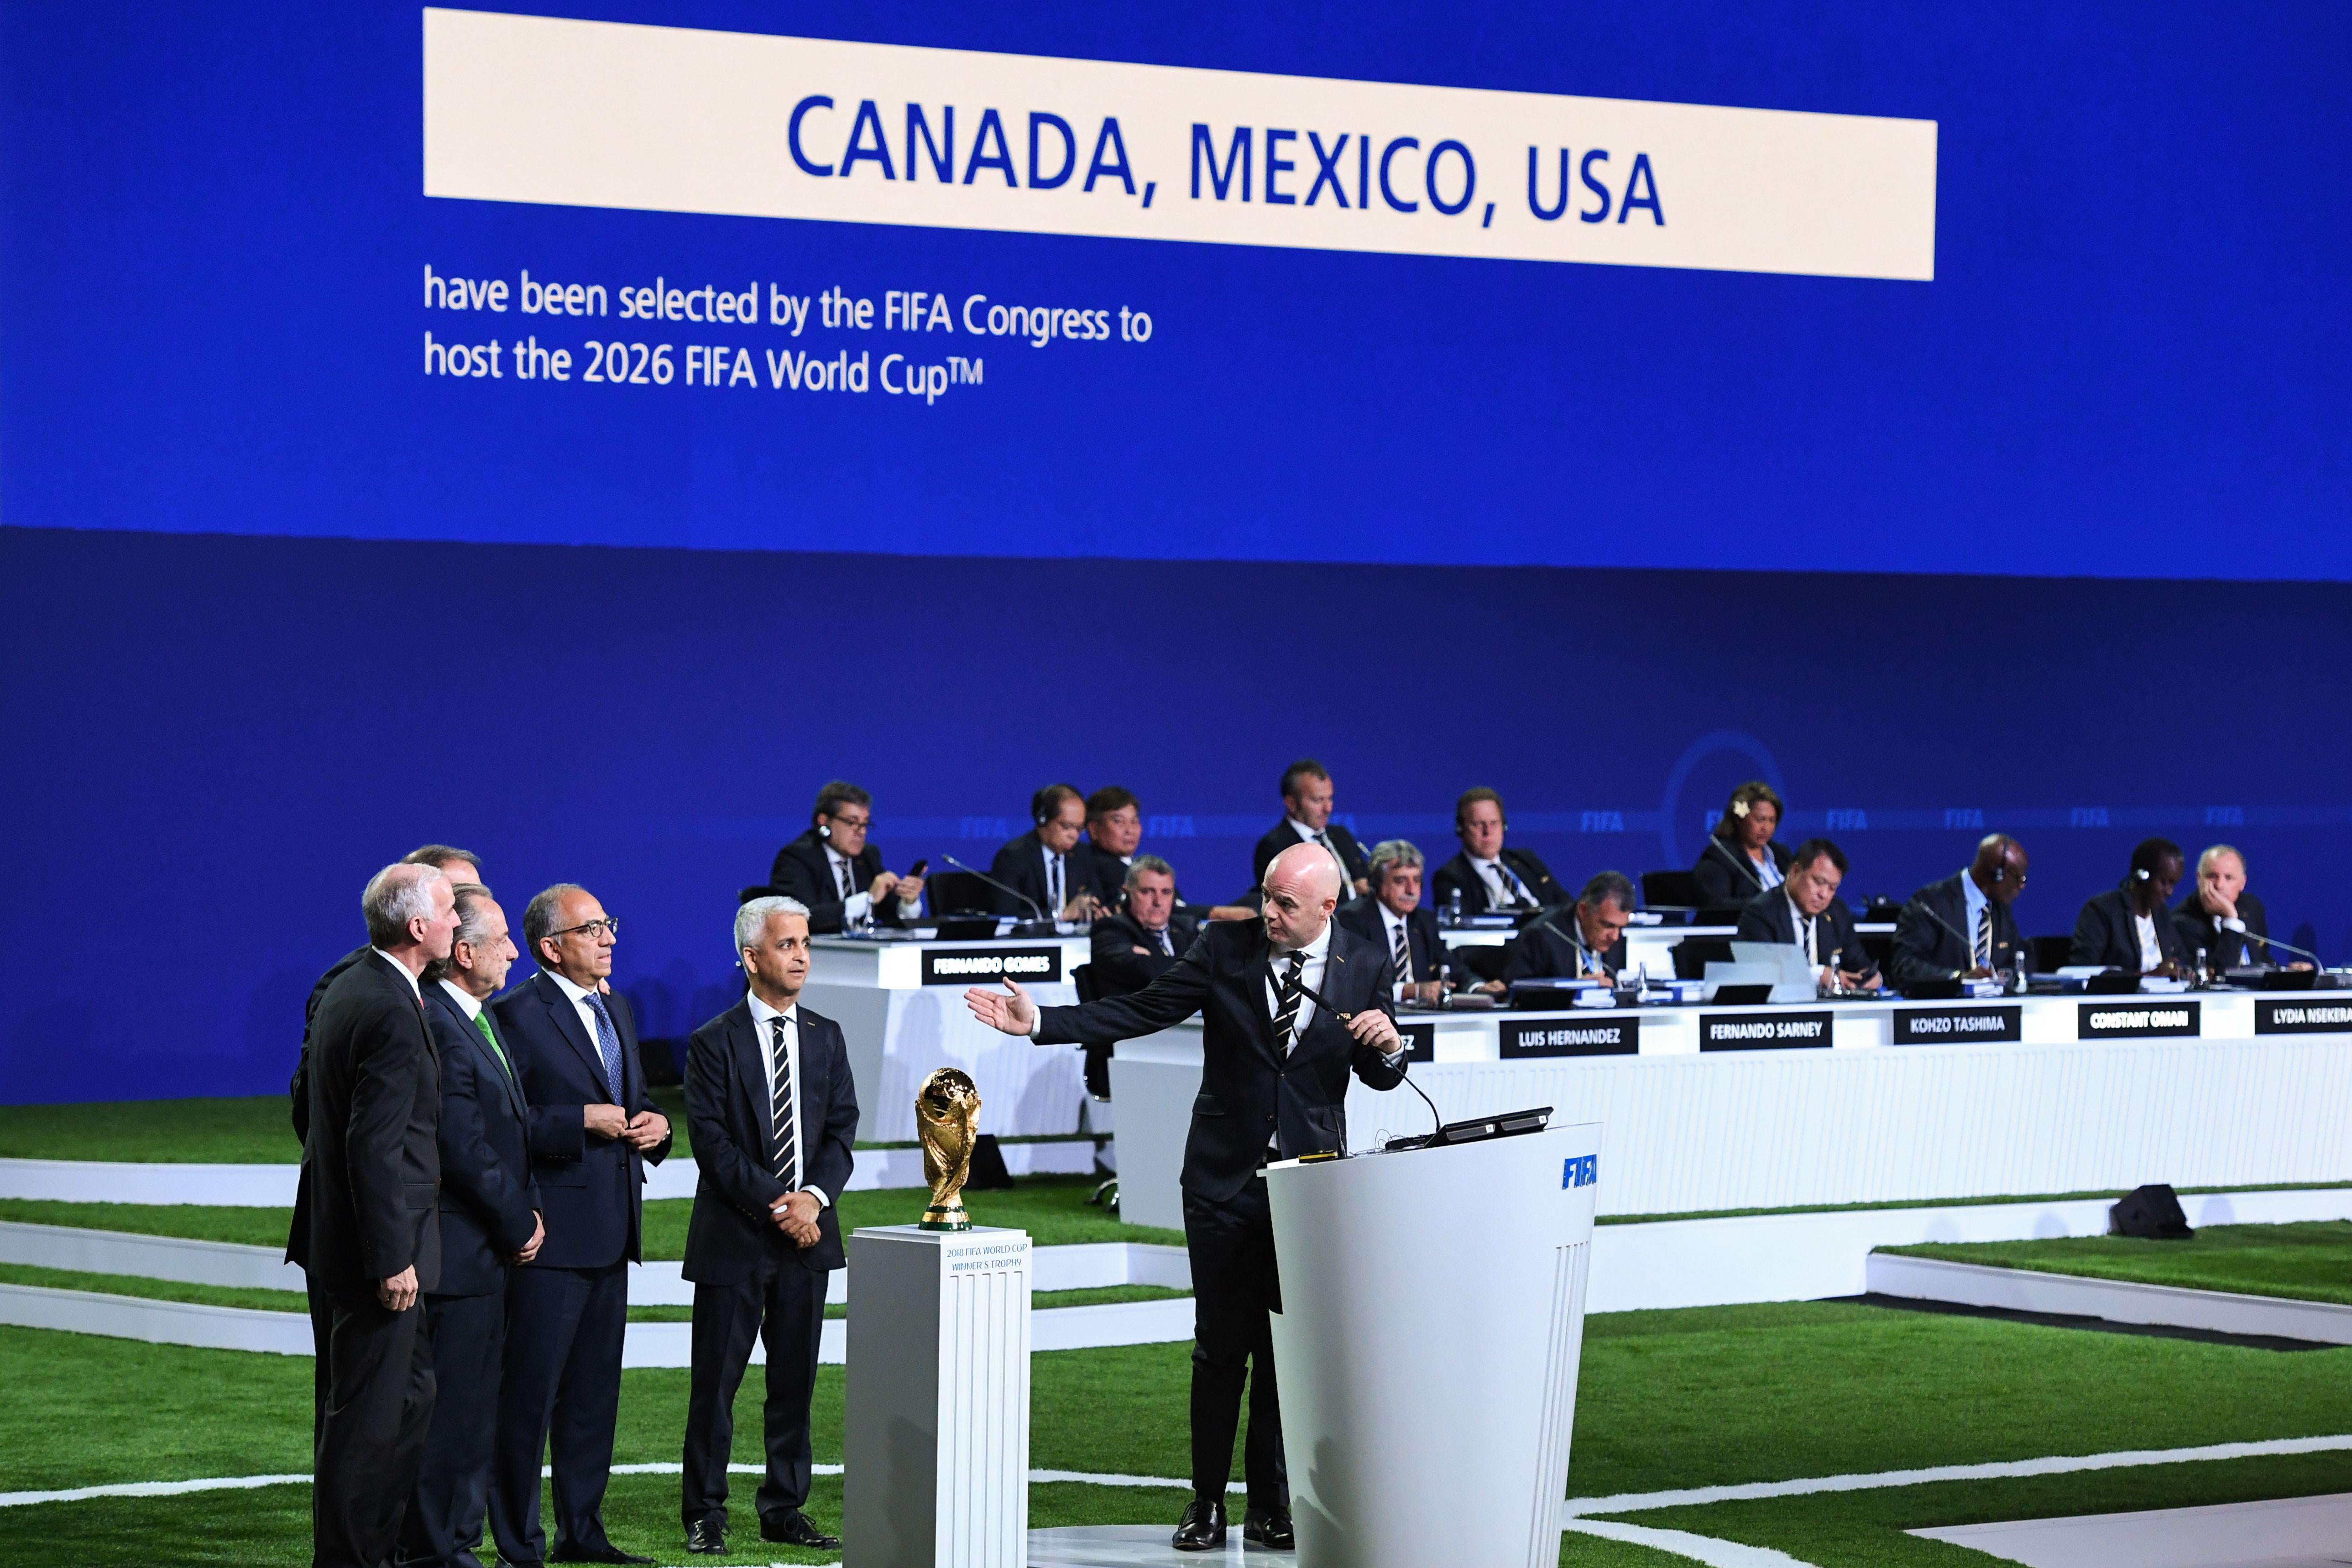 Men in suits stand to the side next to the World Cup trophy while another man in a suit talks from a white podium and gestures toward them.